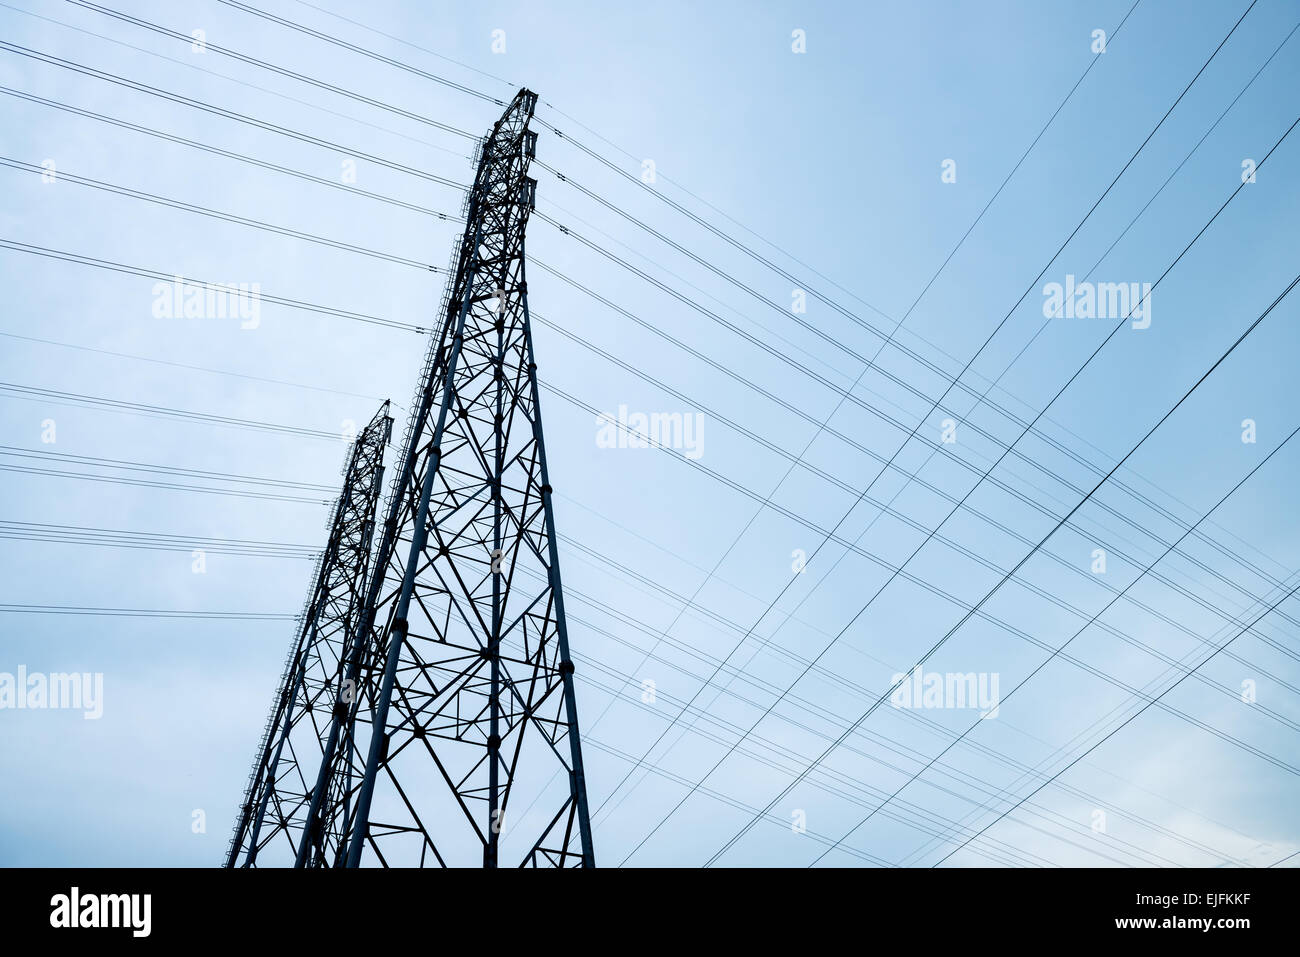 alternative architecture blue built cable cloudy current danger distribution electric electrical electricity energetic energy en Stock Photo